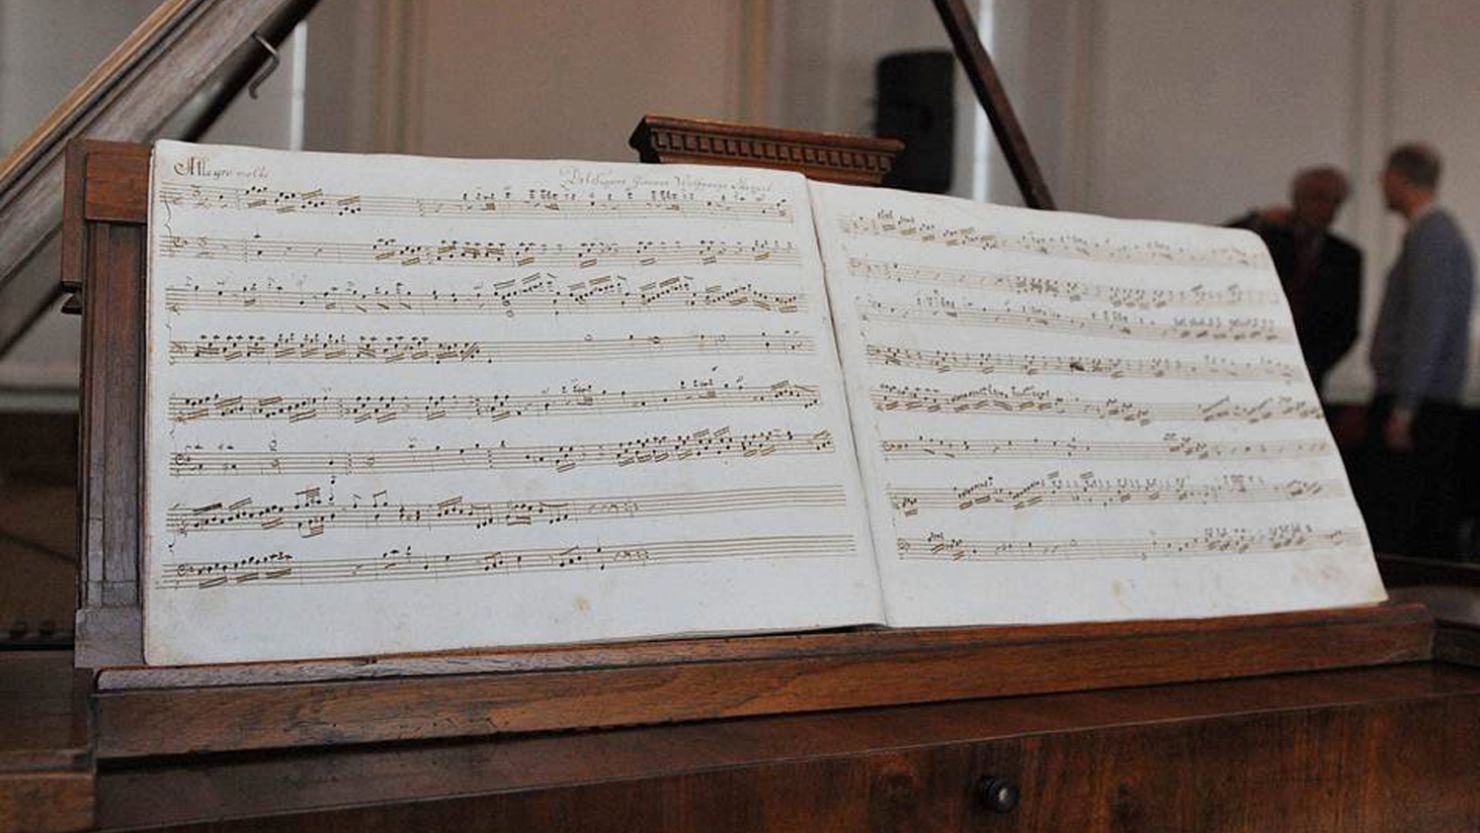 The previously unknown work by Wolfgang Amadeus Mozart at Mozart House, in Salzburg. 